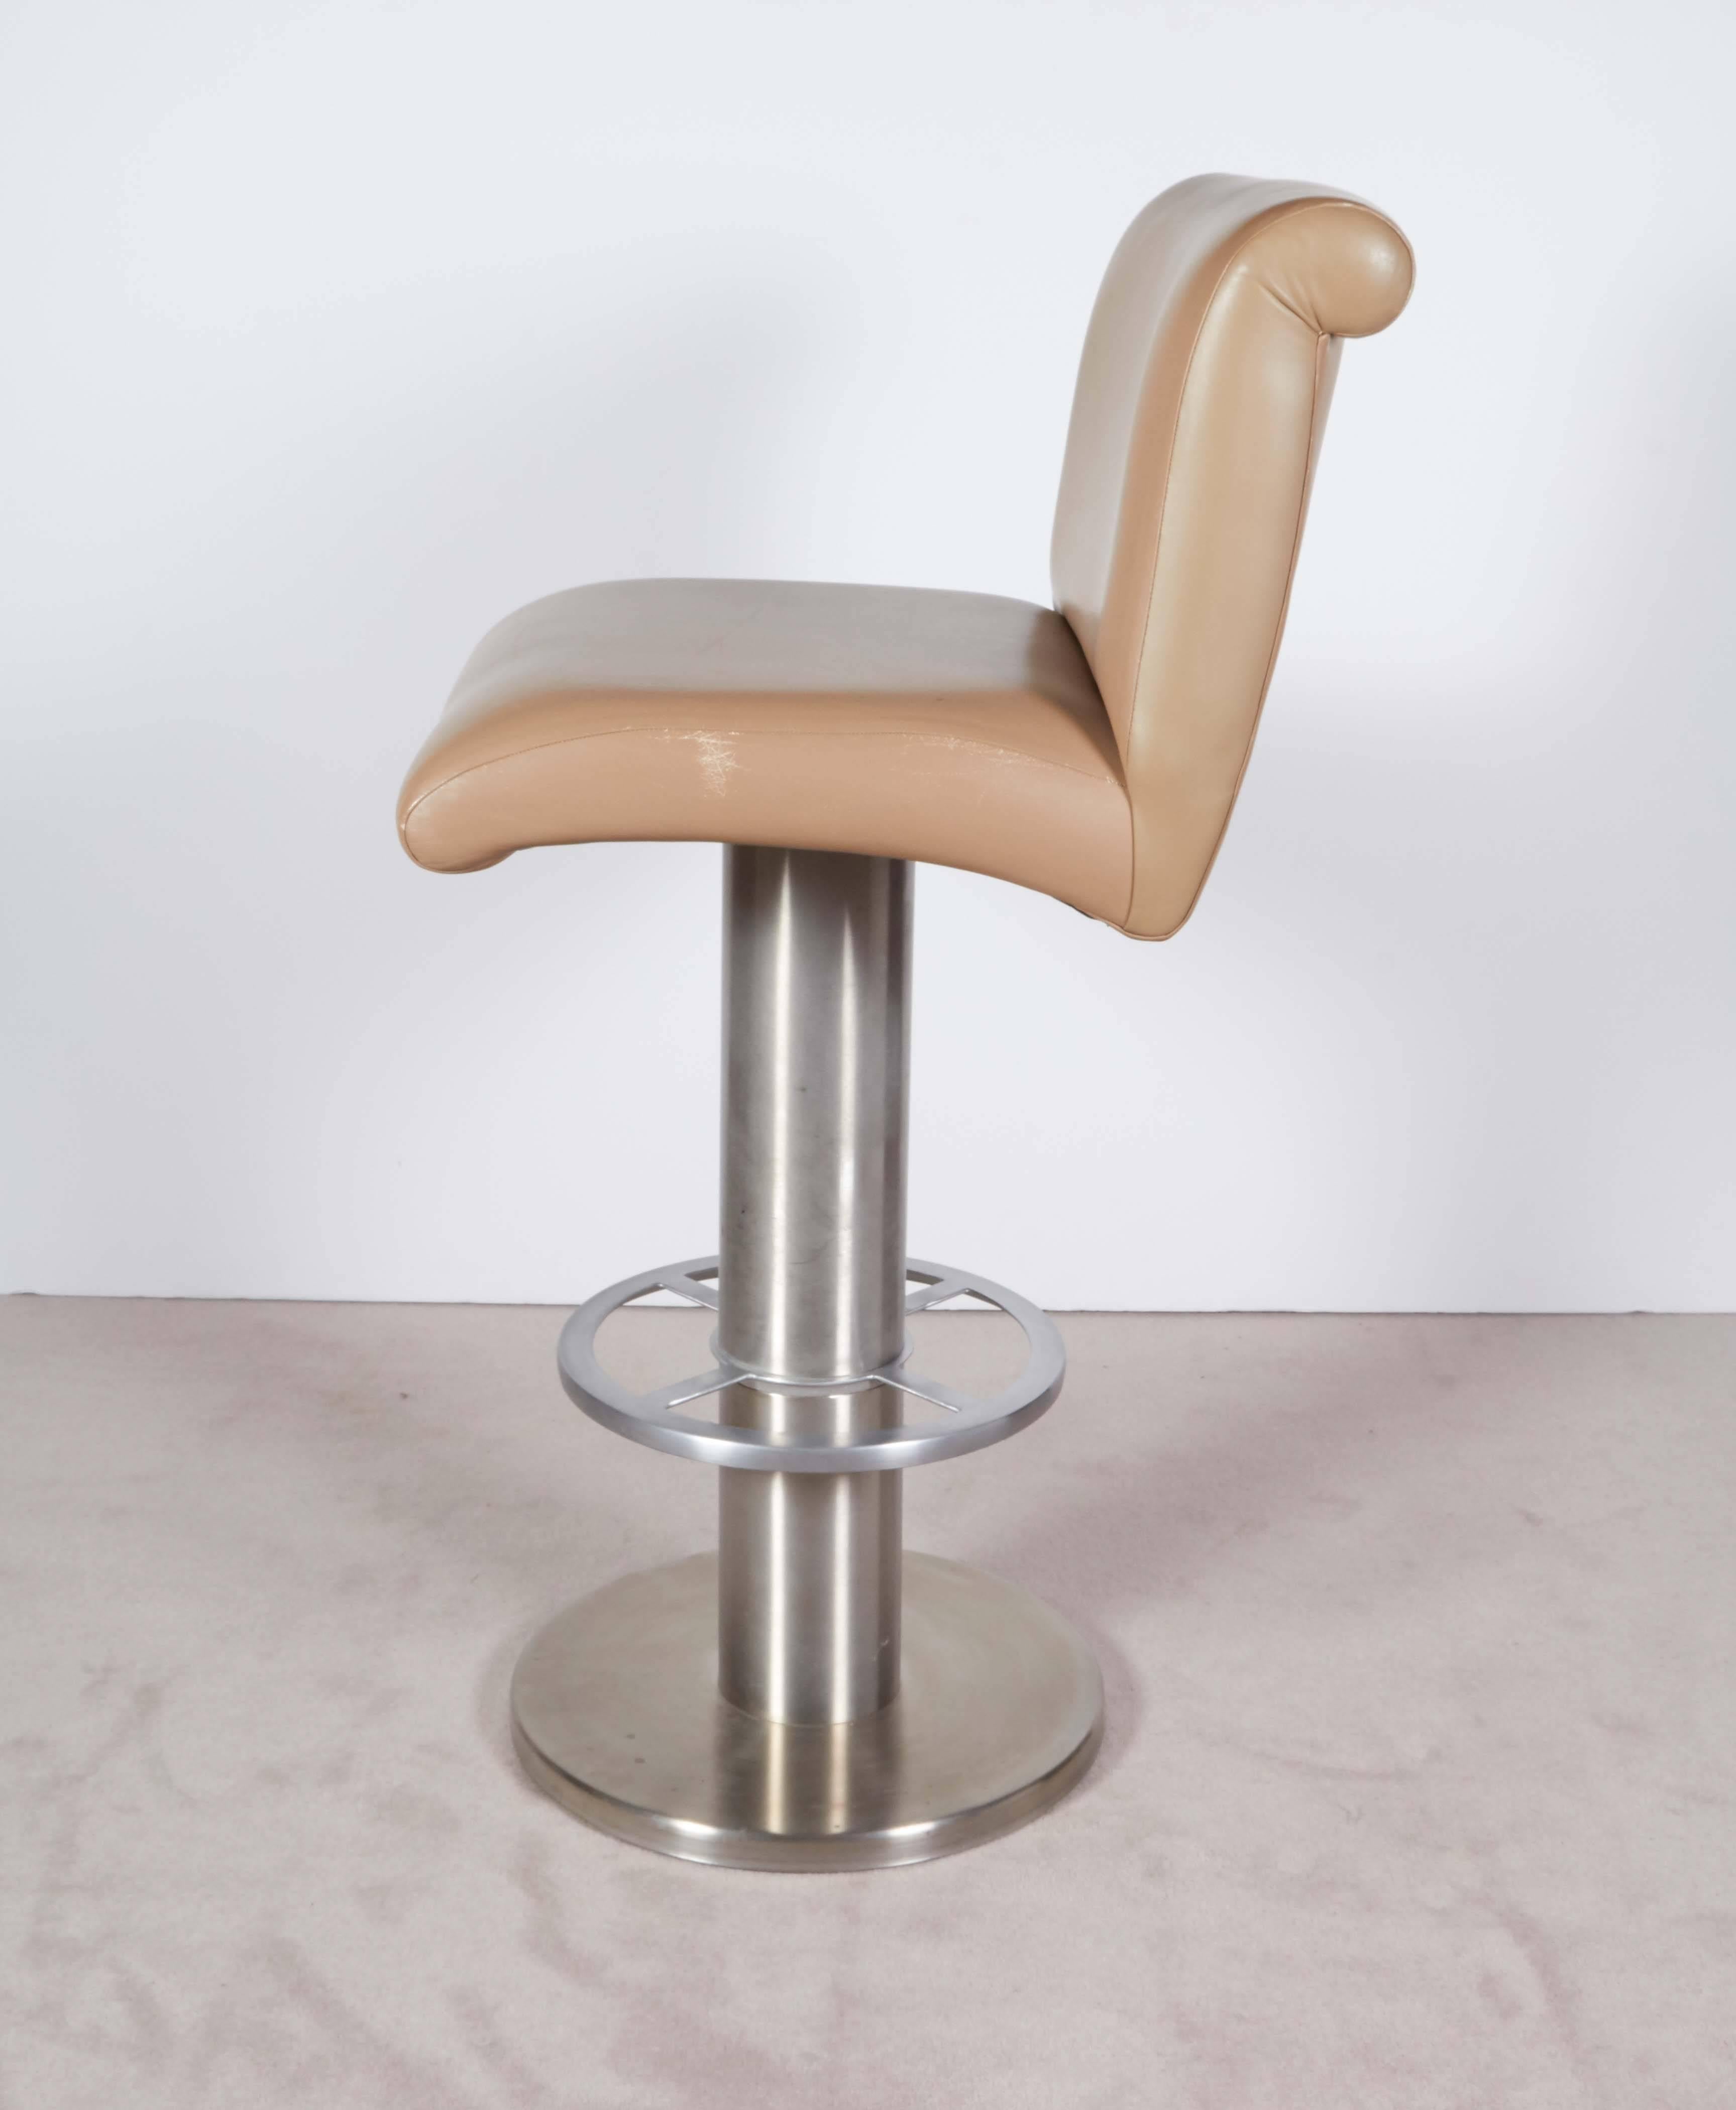 Late 20th Century Set of Five Design For Leisure Barstools in Beige Leather on Stainless Steel